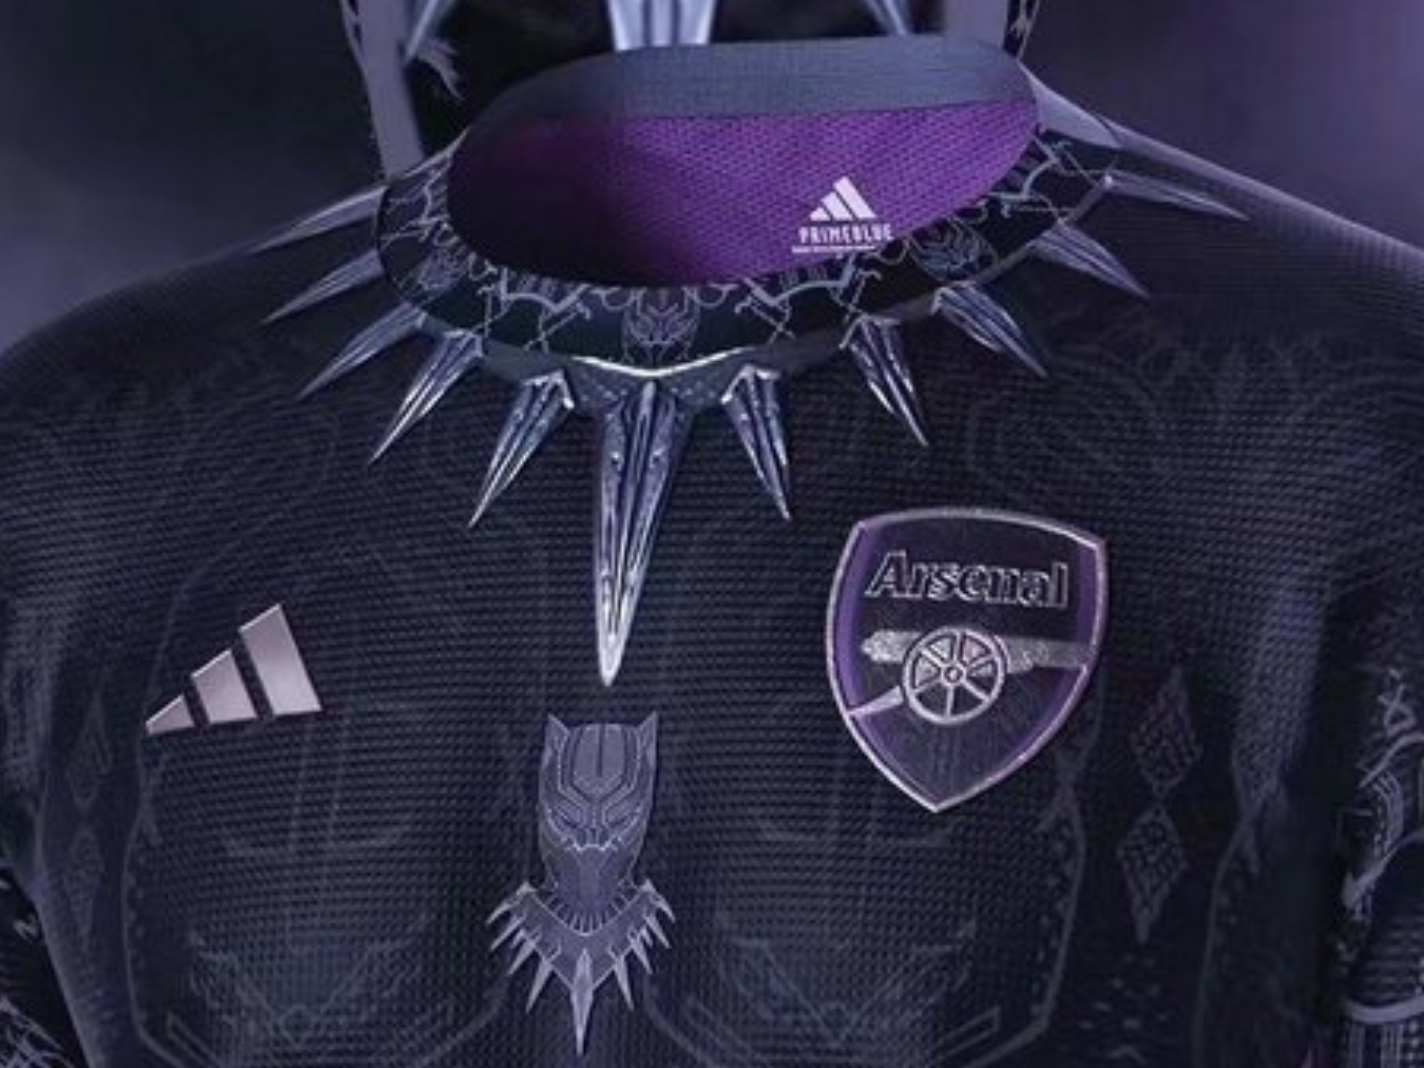 Concept Kit Shows What An Arsenal x Black Panther Crossover Would Look Like